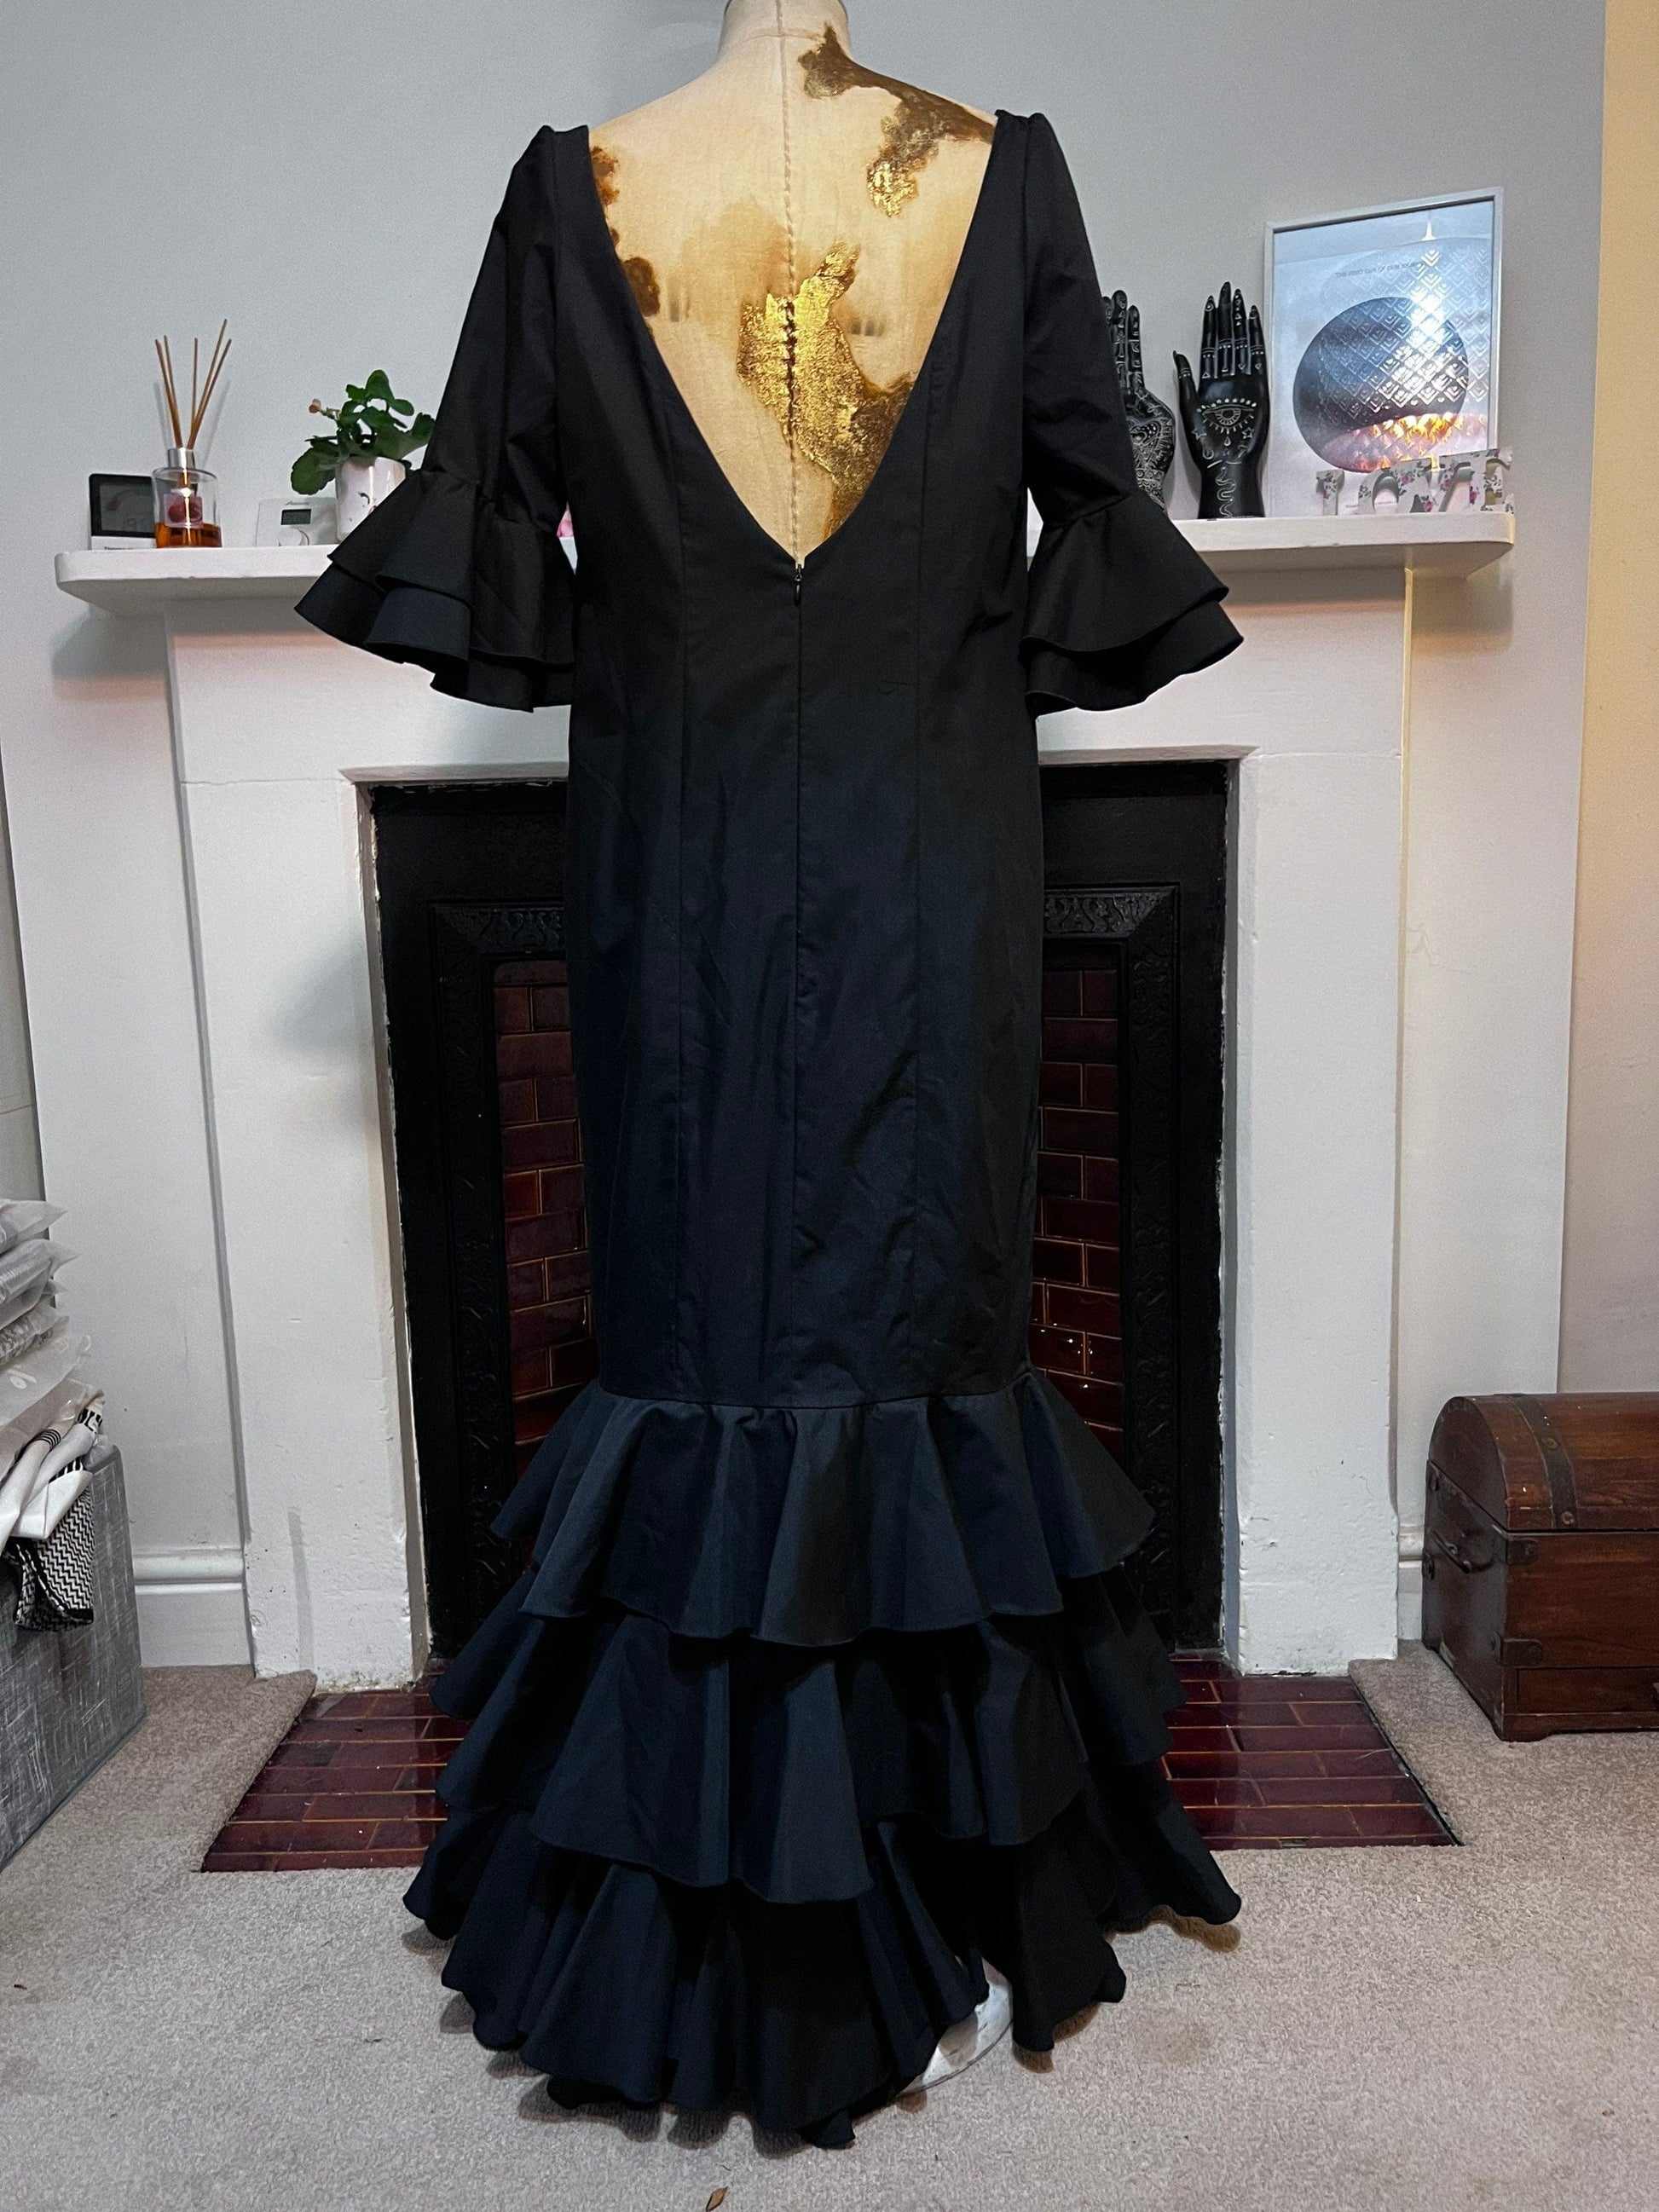 Vintage Black Spanish Dress - Hand Made Vintage Dress in a flamenco style with ruffles to sleeves and hem - Black Cotton Ball Gown